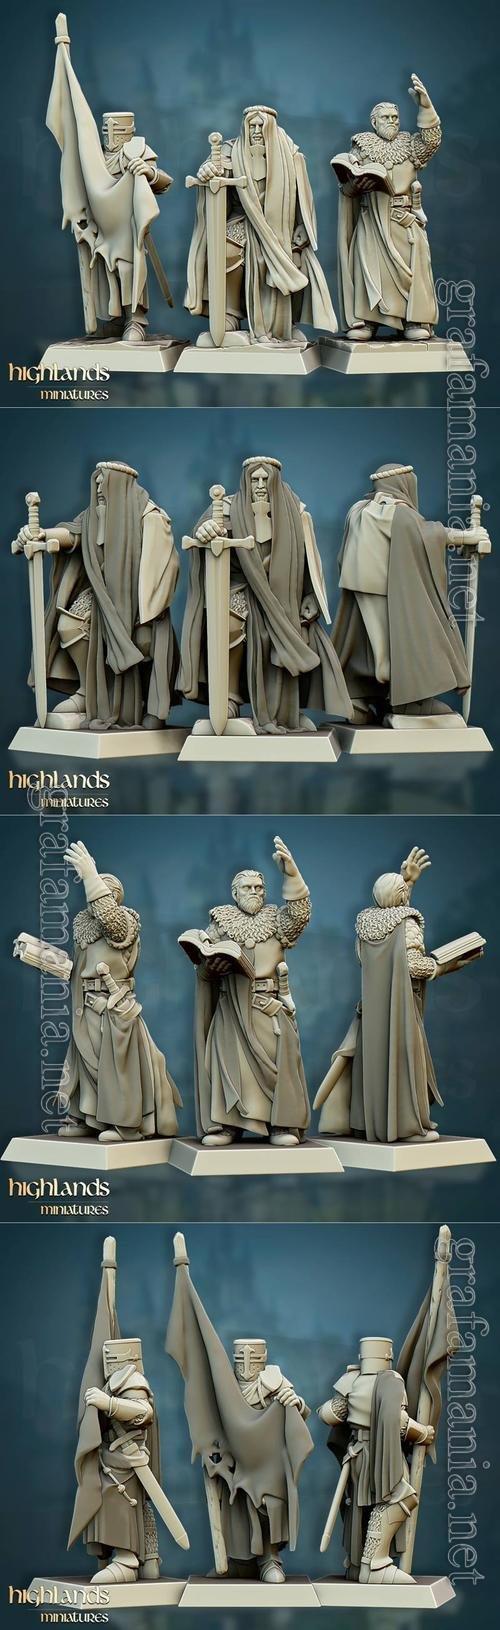 Highlands Miniatures - Crusaders Command Group 3D Print